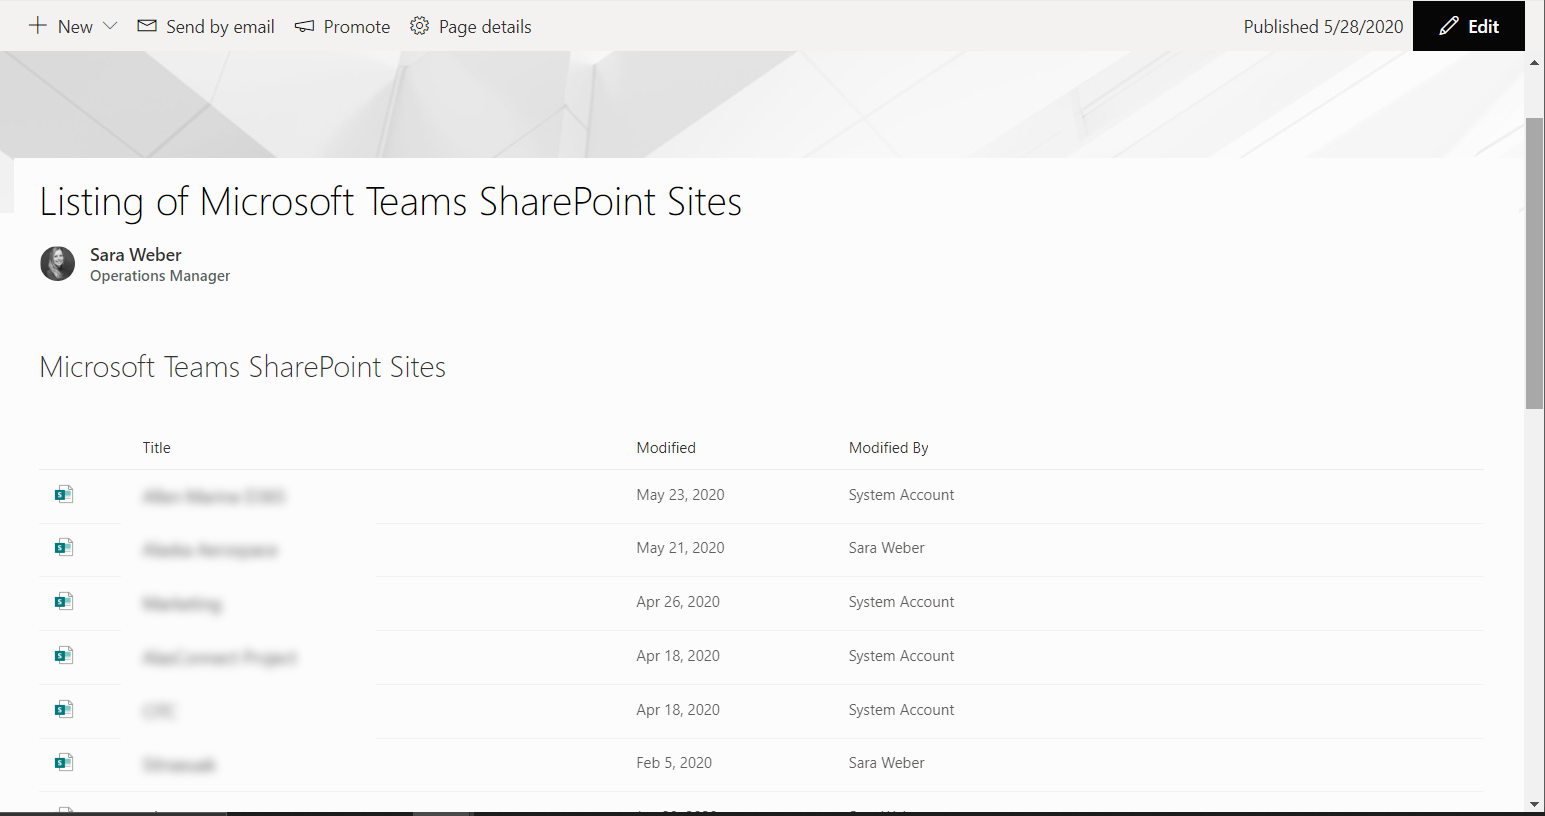 Microsoft Teams/Office 365 Groups SharePoint Sites listing